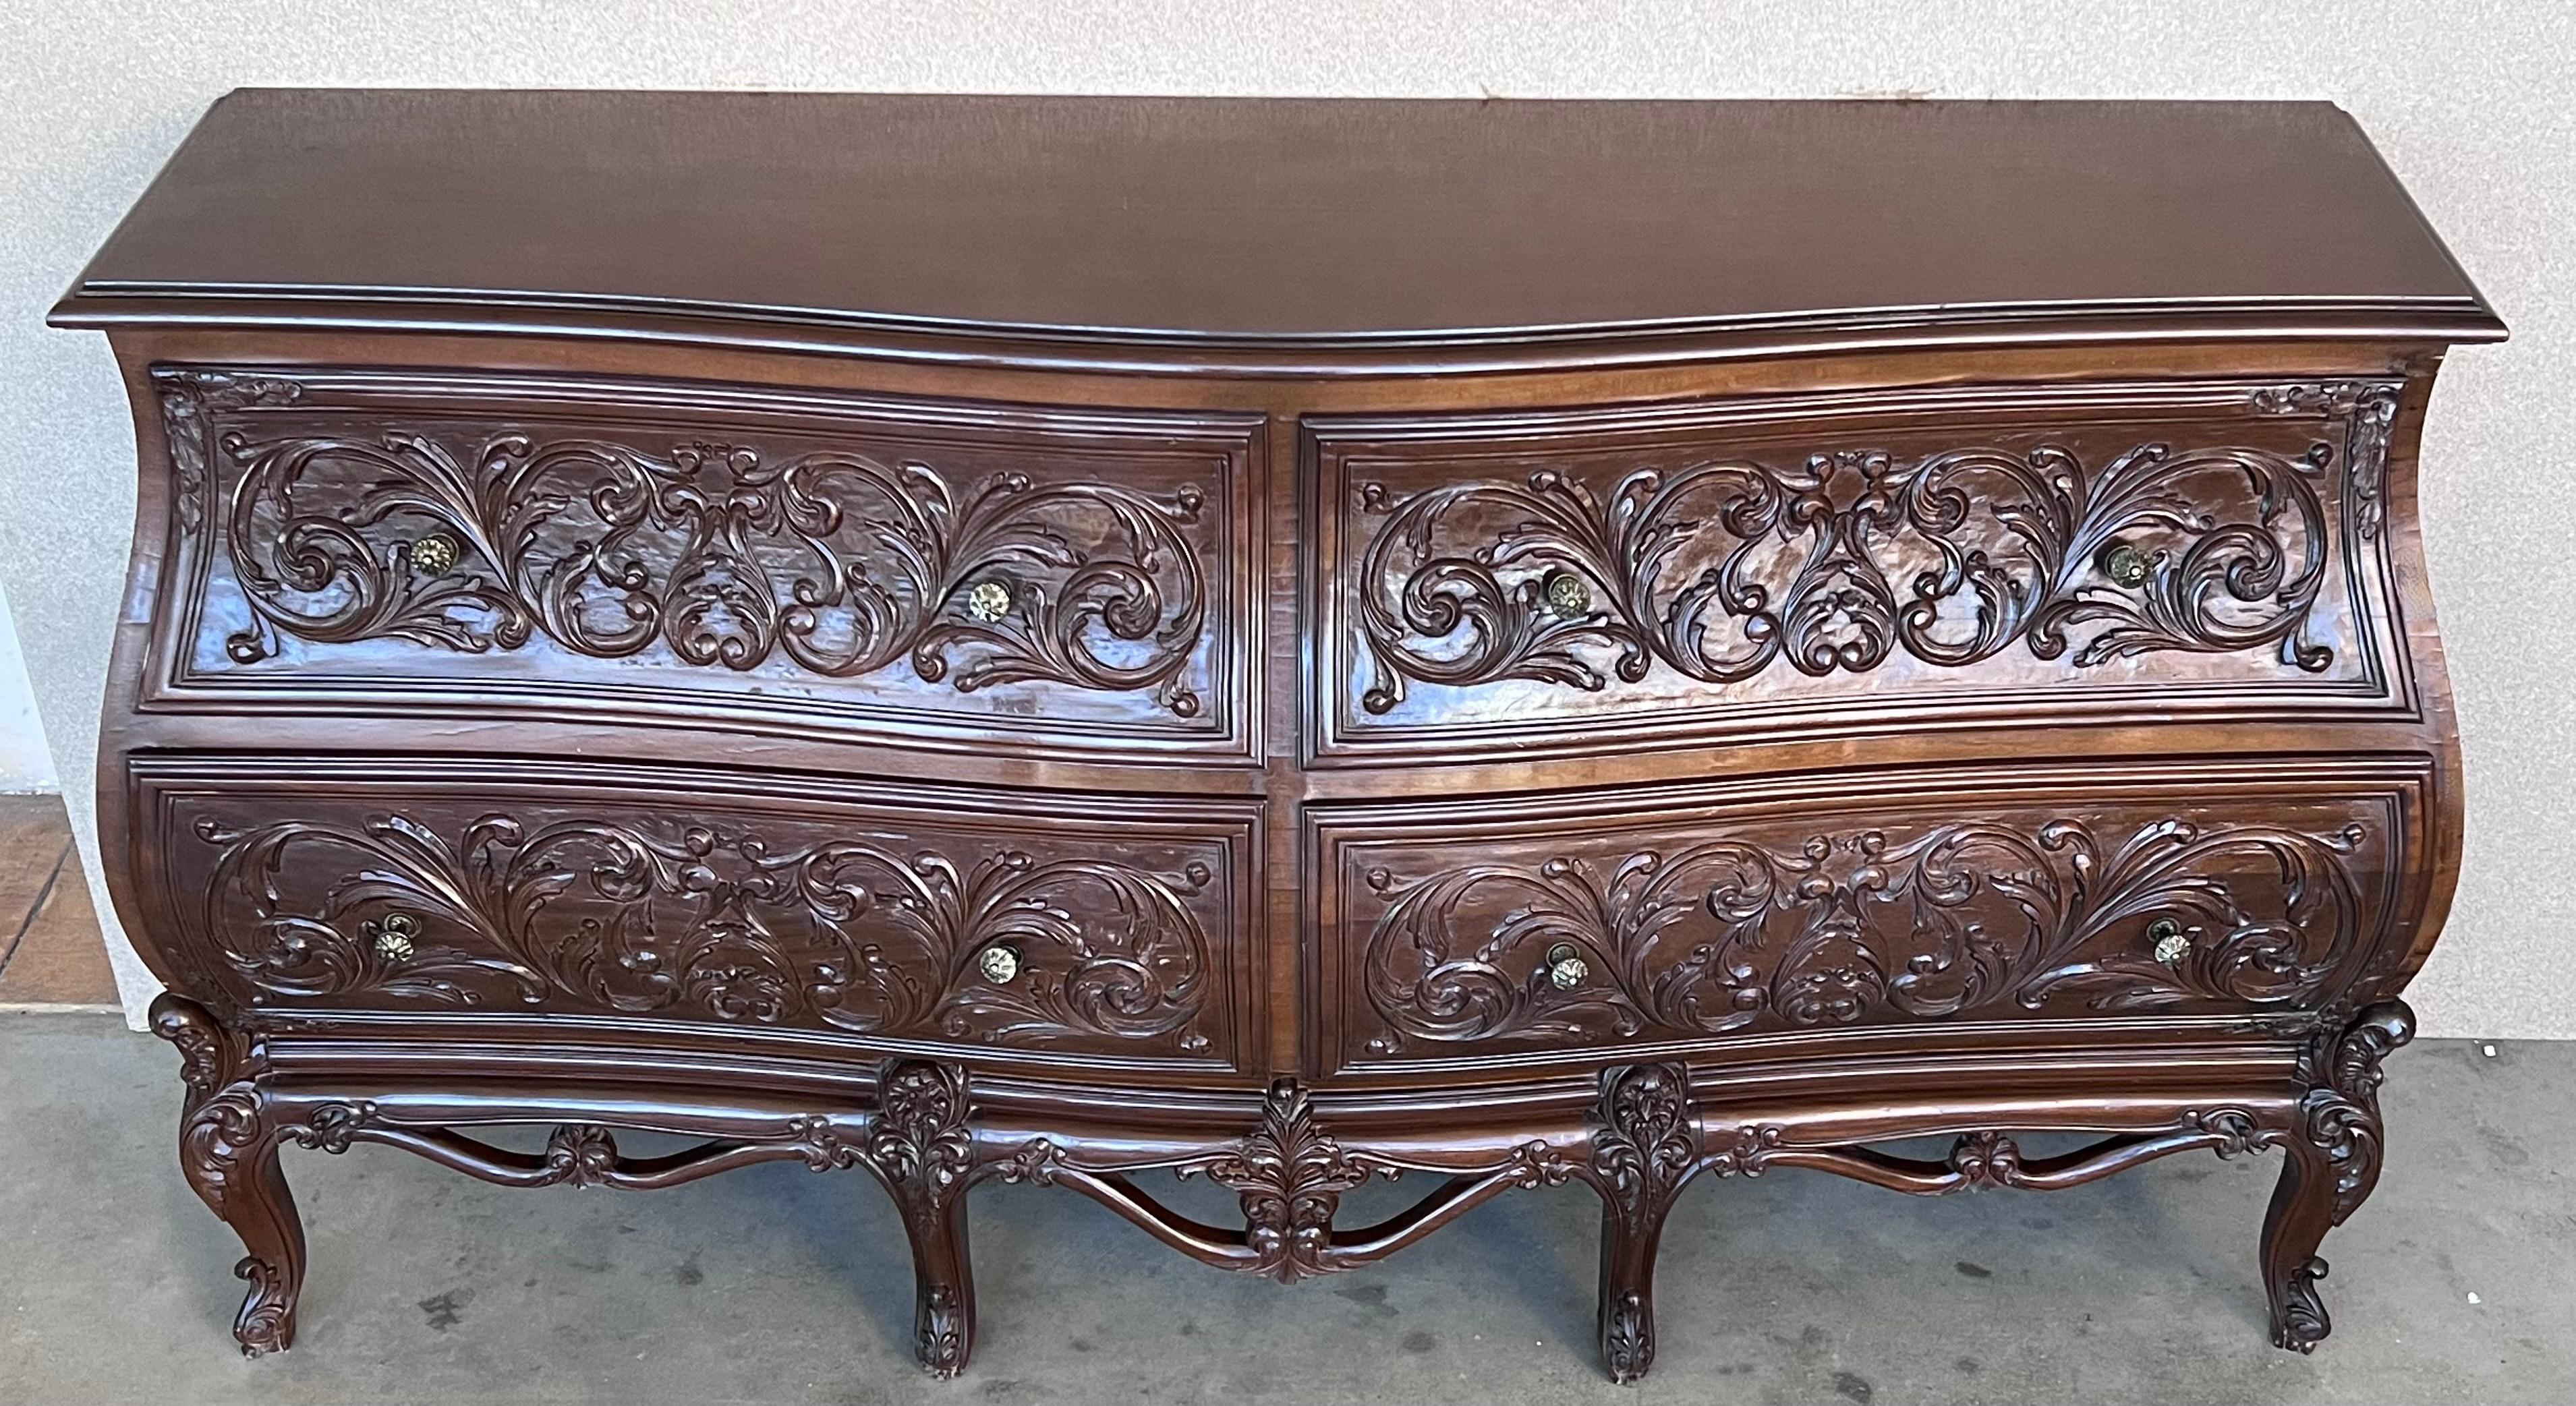 A finely carved late 20th century walnut commode in the French provincial Louis XV style particular to Nimes. The commode of bombe form with carved canted corners flanking four long drawers, each decorated with carved cartouches that frame the